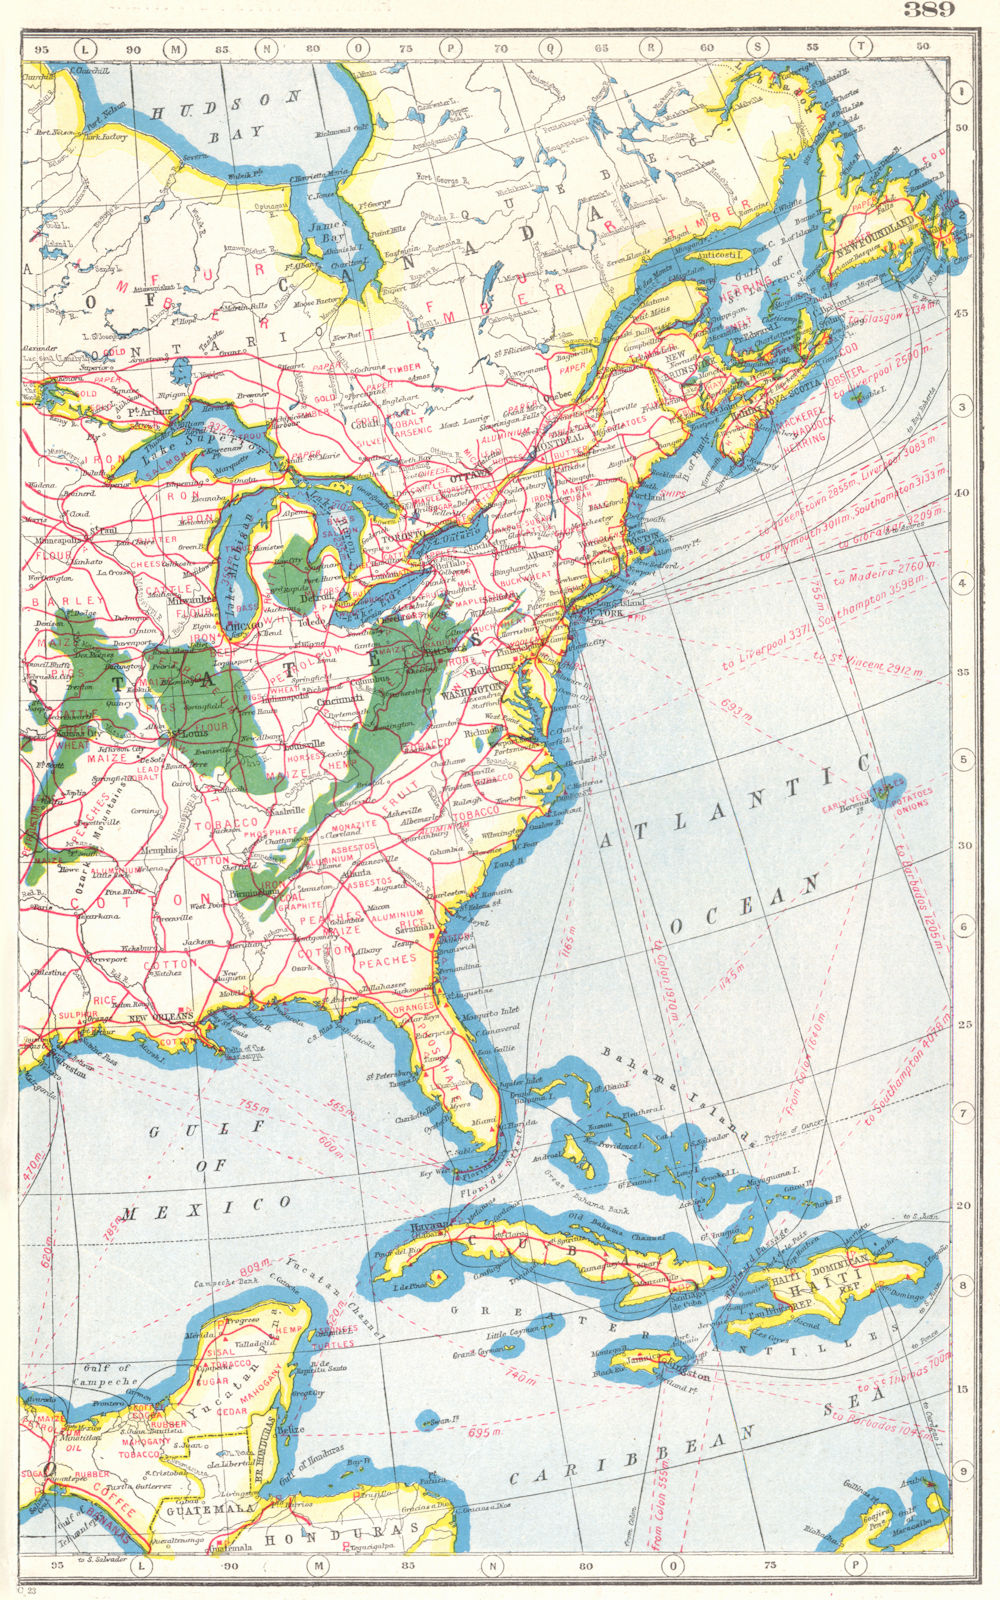 NORTH AMERICA EAST. Showing Agricultural & Commercial products 1920 old map